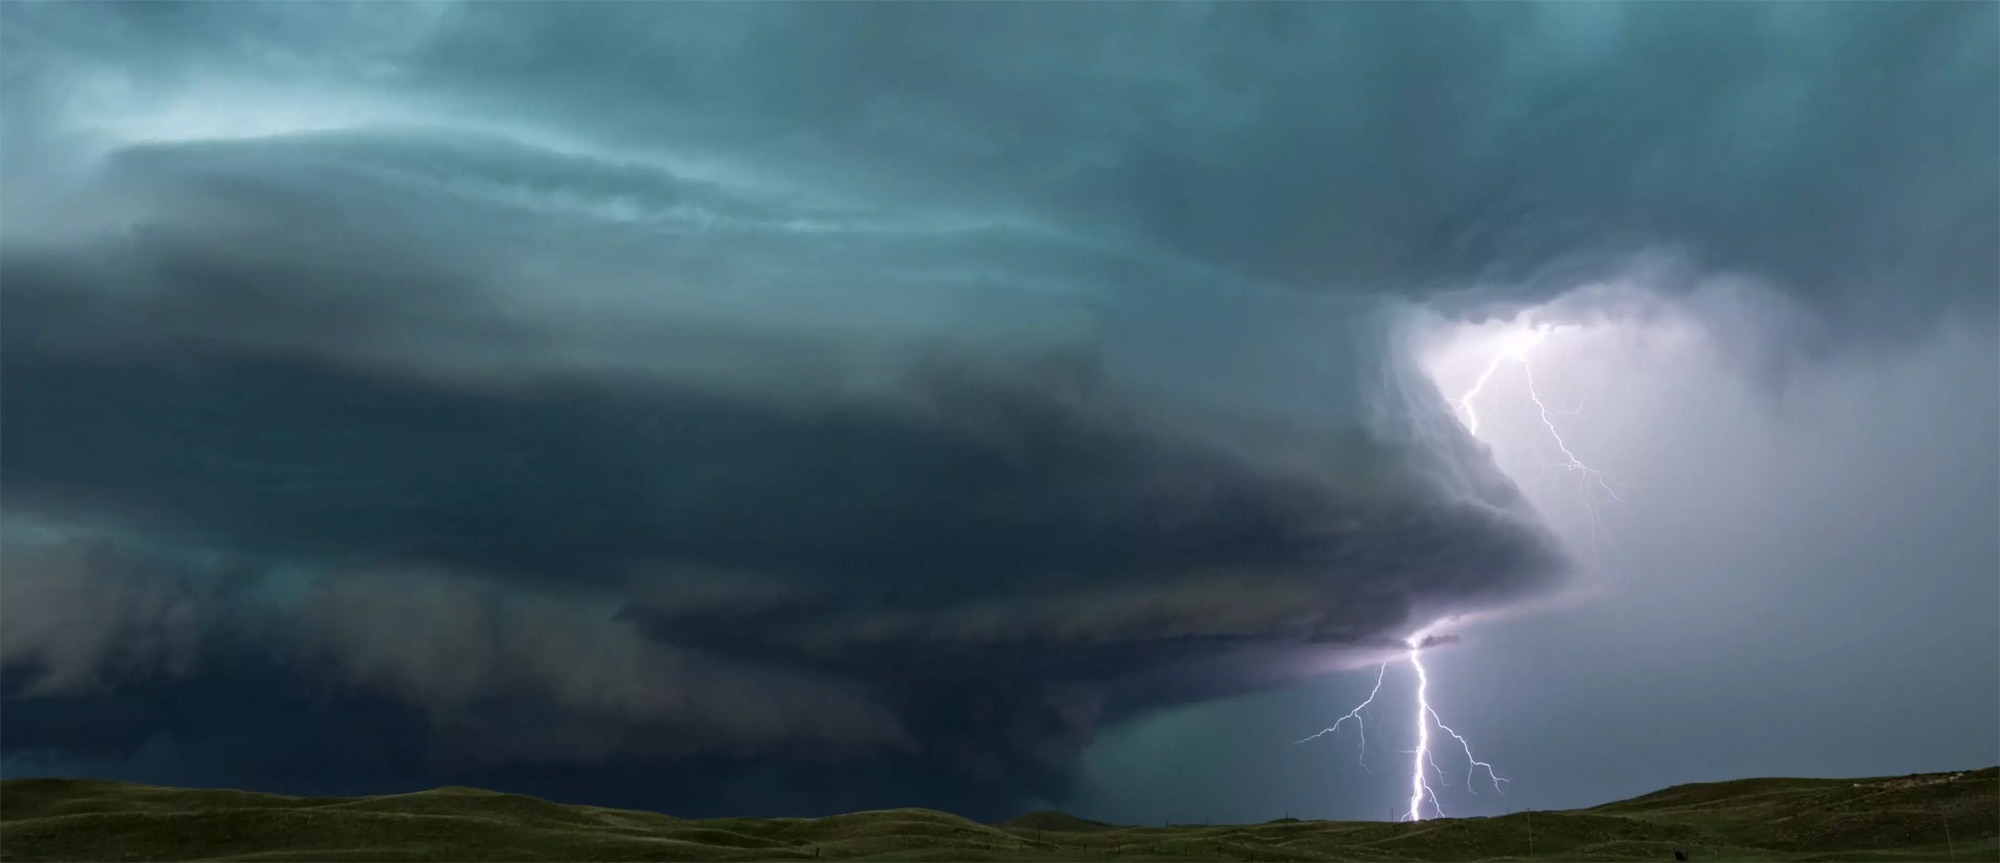 a supercell grows